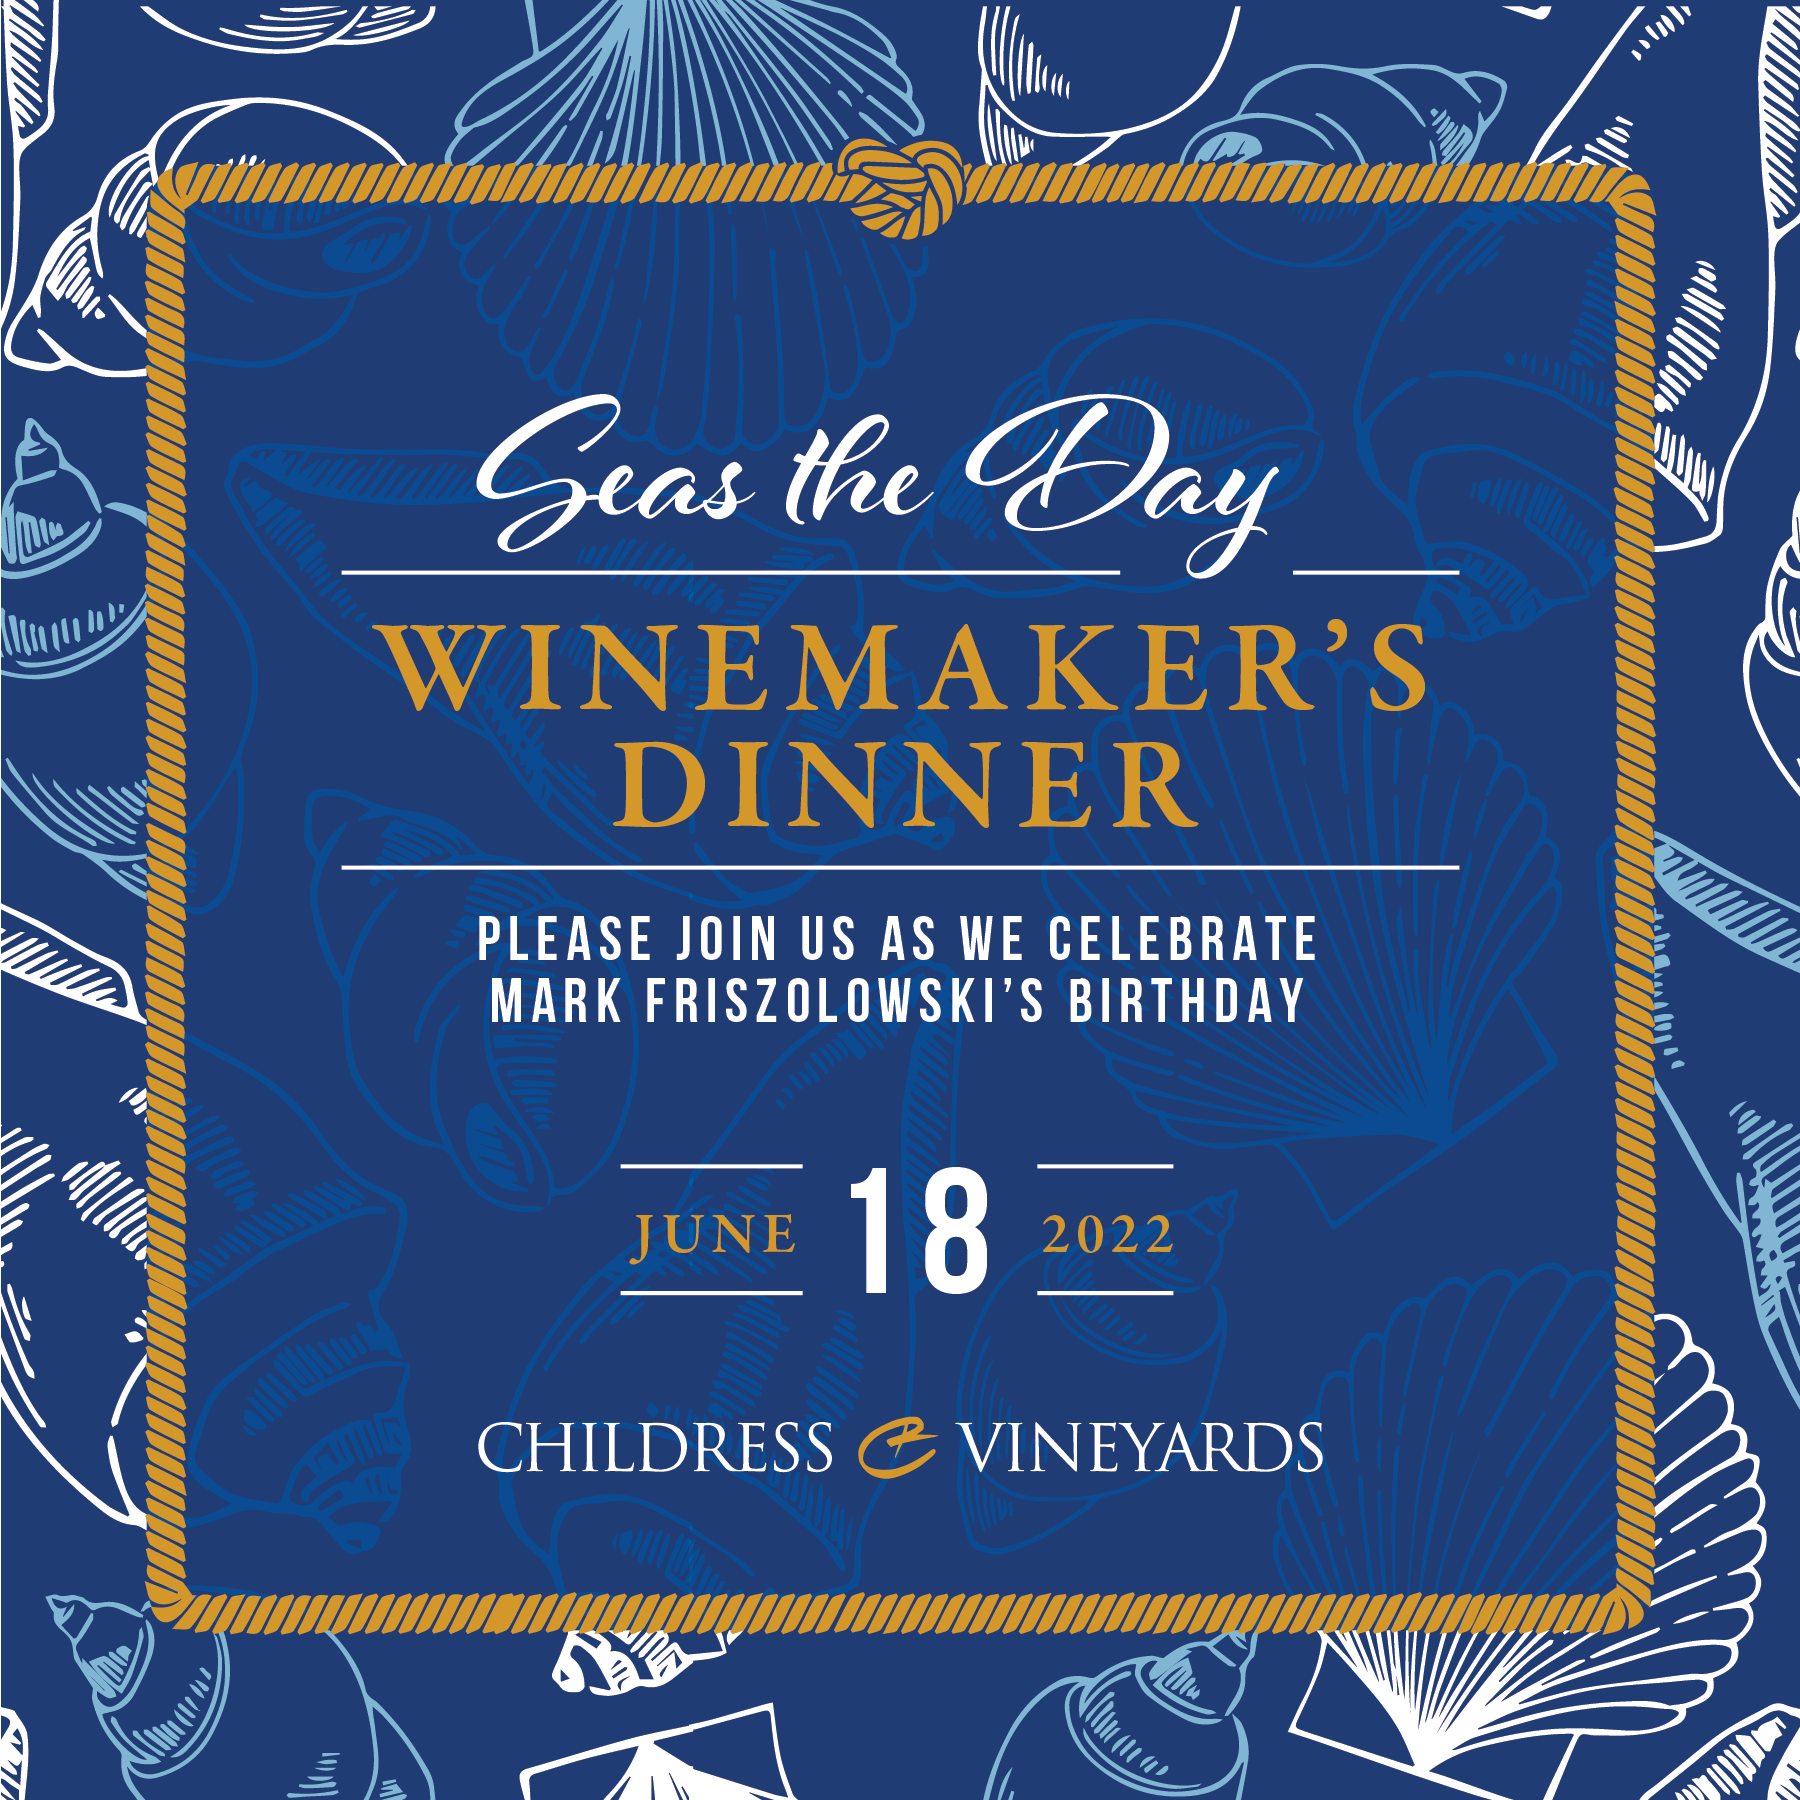 Childress Vineyards and Winery Event Winemaker's Dinner